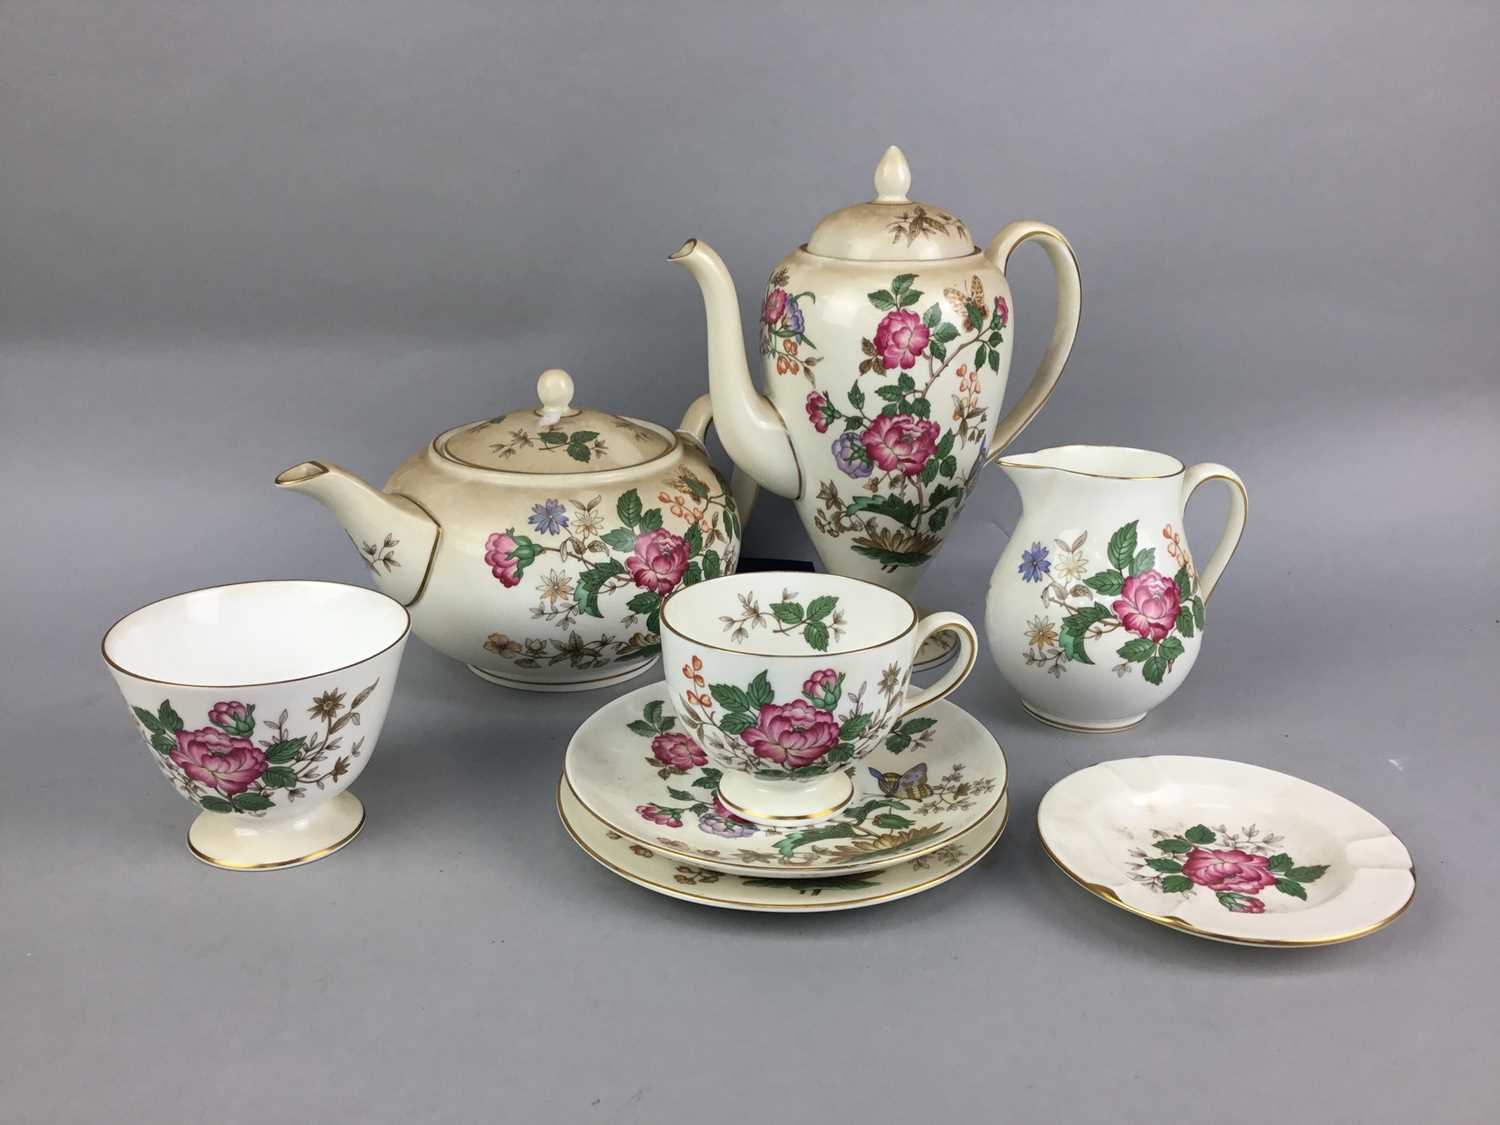 Lot 80 - A WEDGWOOD CHARNWOOD PATTERN DINNER AND TEA